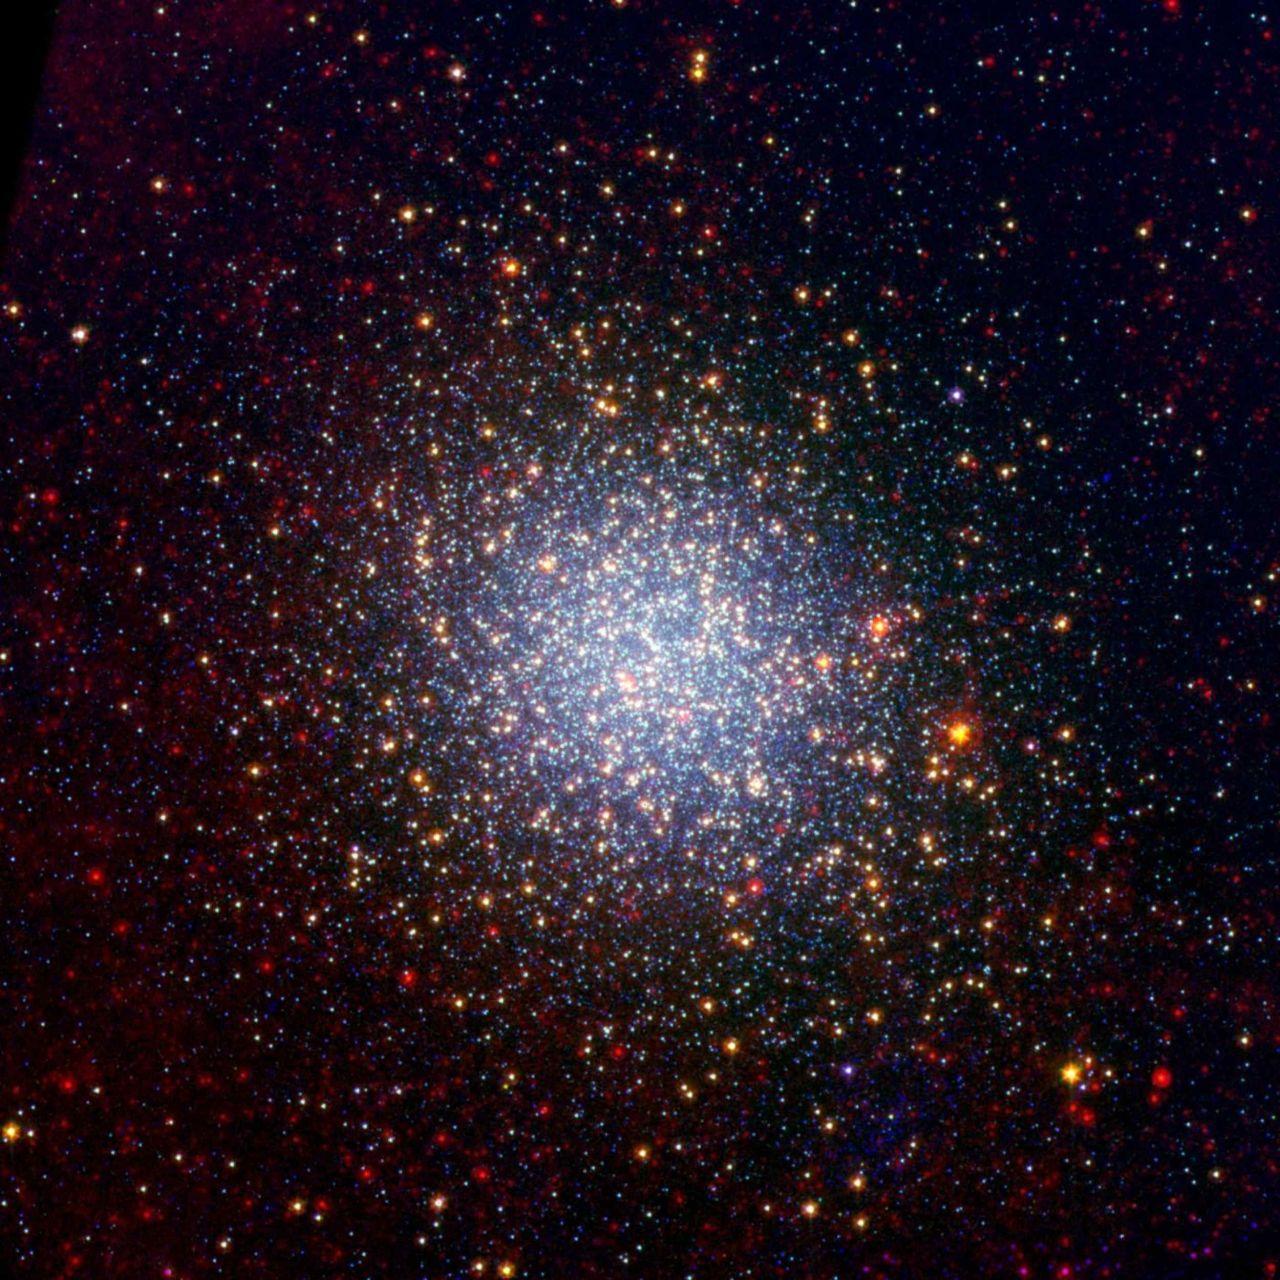 This star cluster called Omega Centauri, imaged by Spitzer, is home to millions of stars.